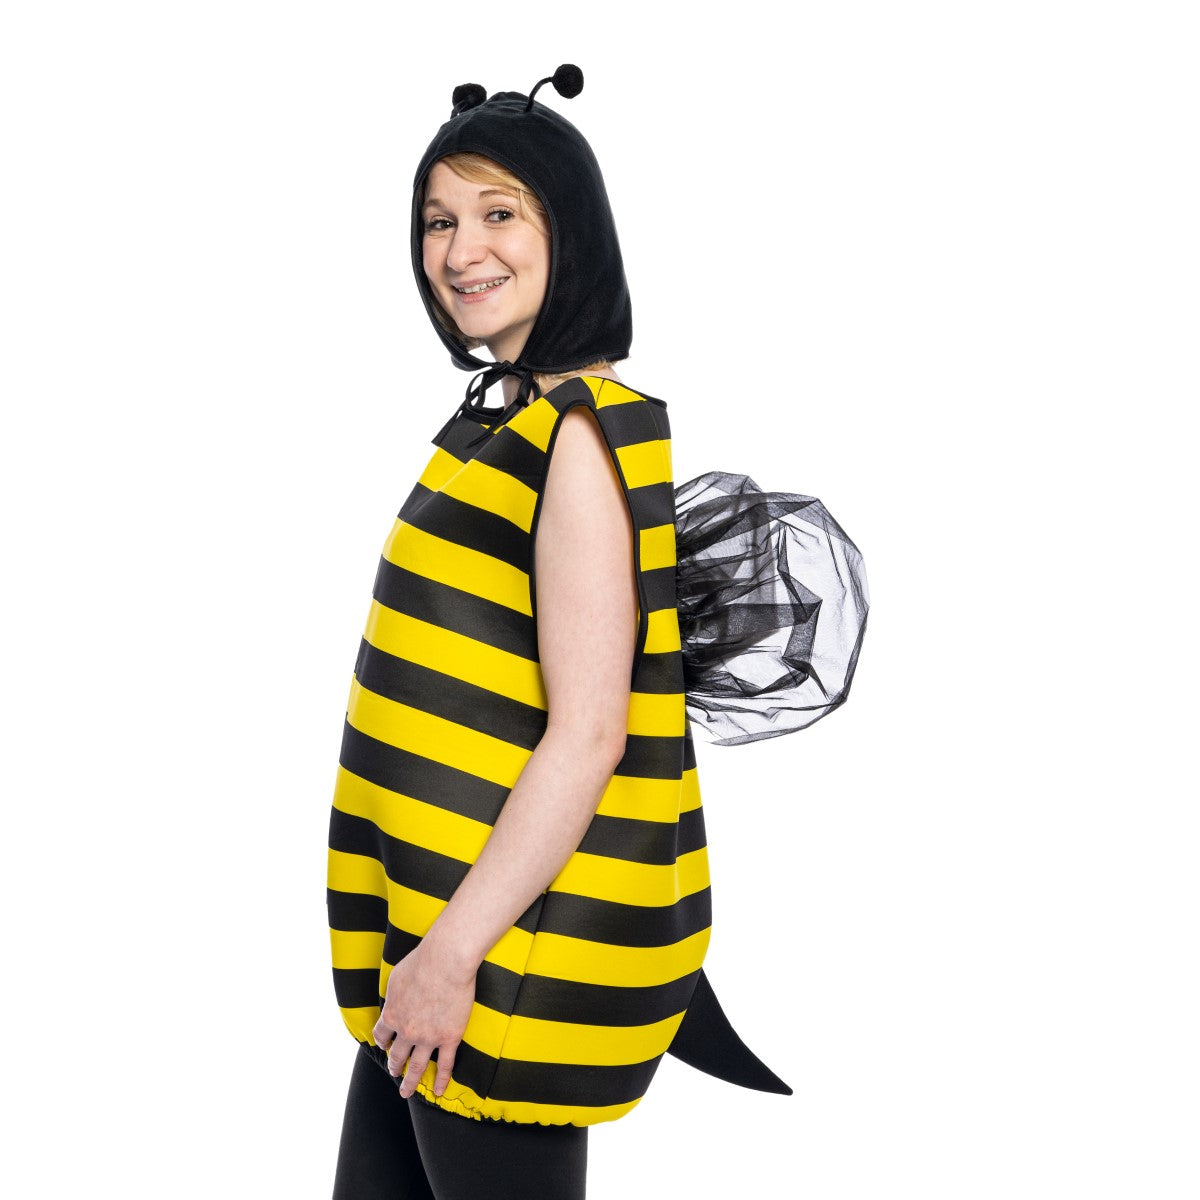 Bumble Bee Halloween Costume with Adjustable Hat Head Piece Pull On Cosplay for Womens